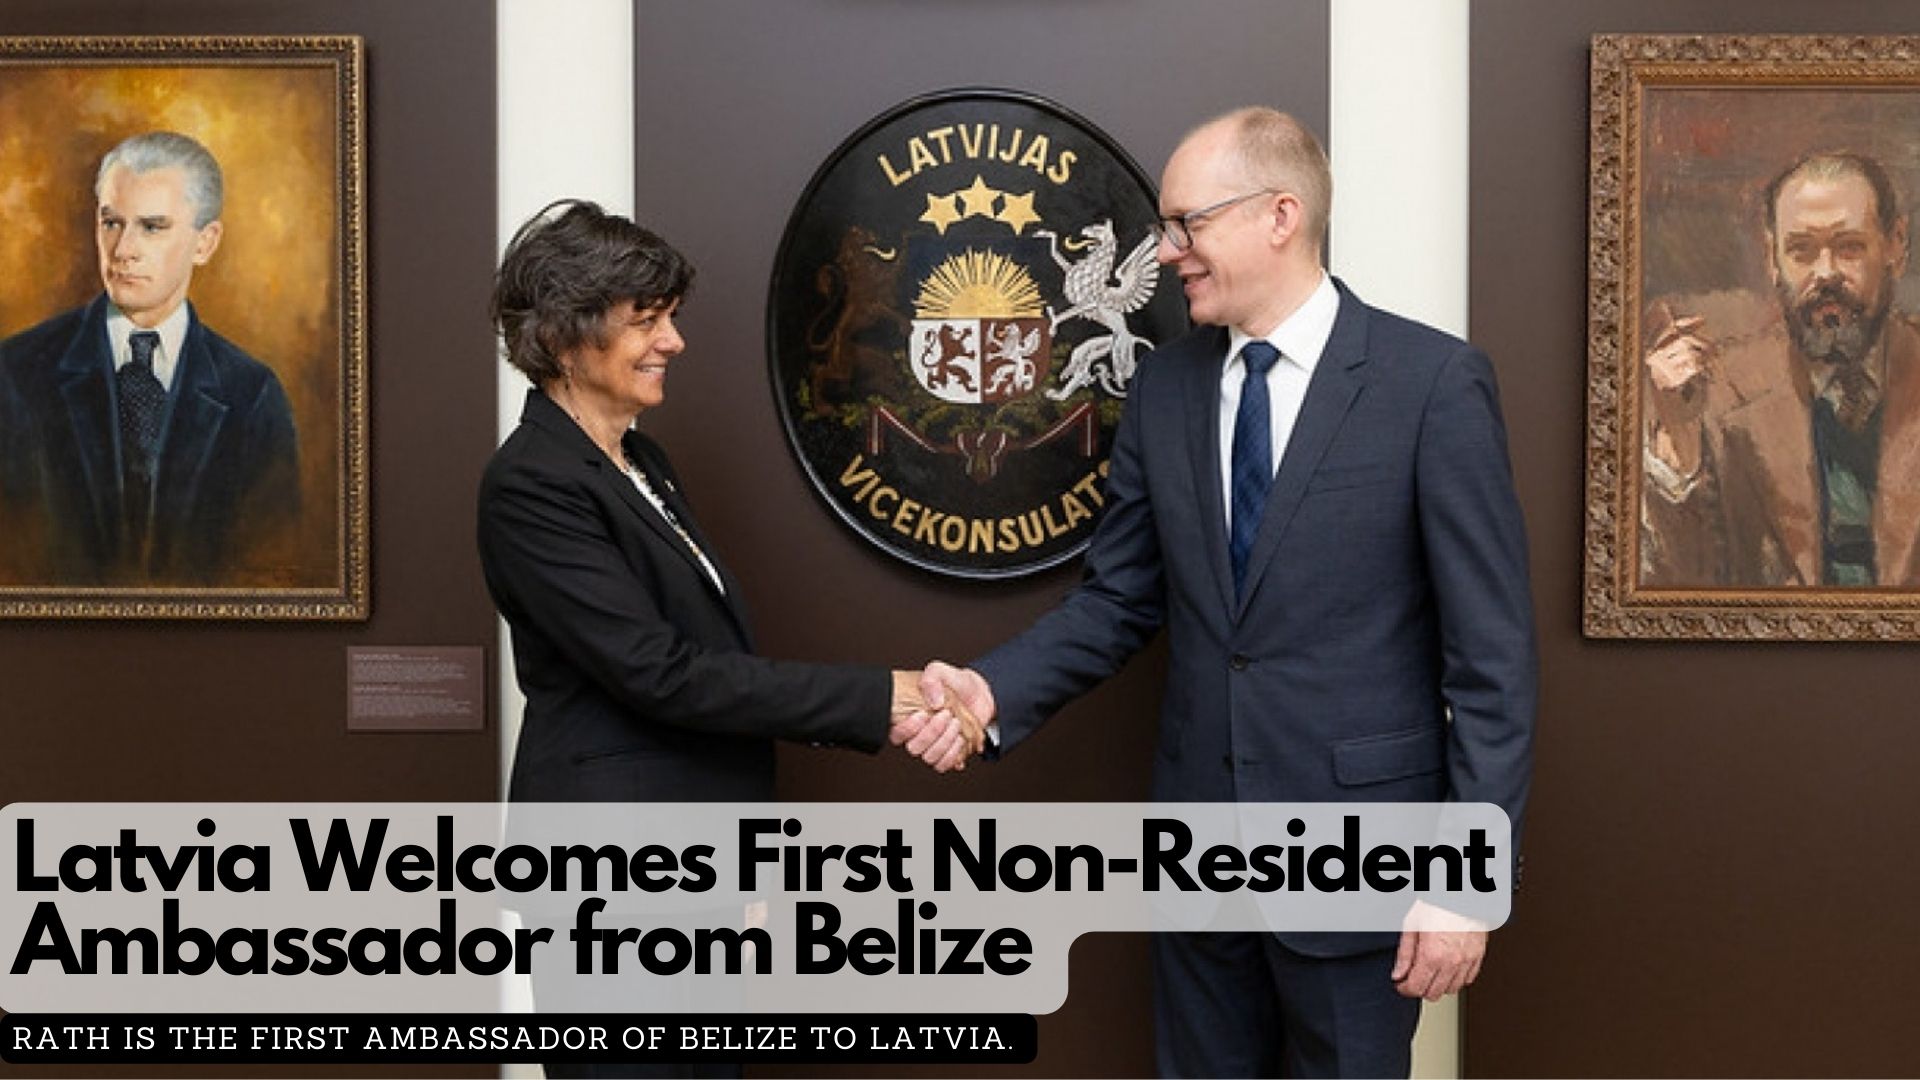 Latvia Welcomes First Non-Resident Ambassador from Belize